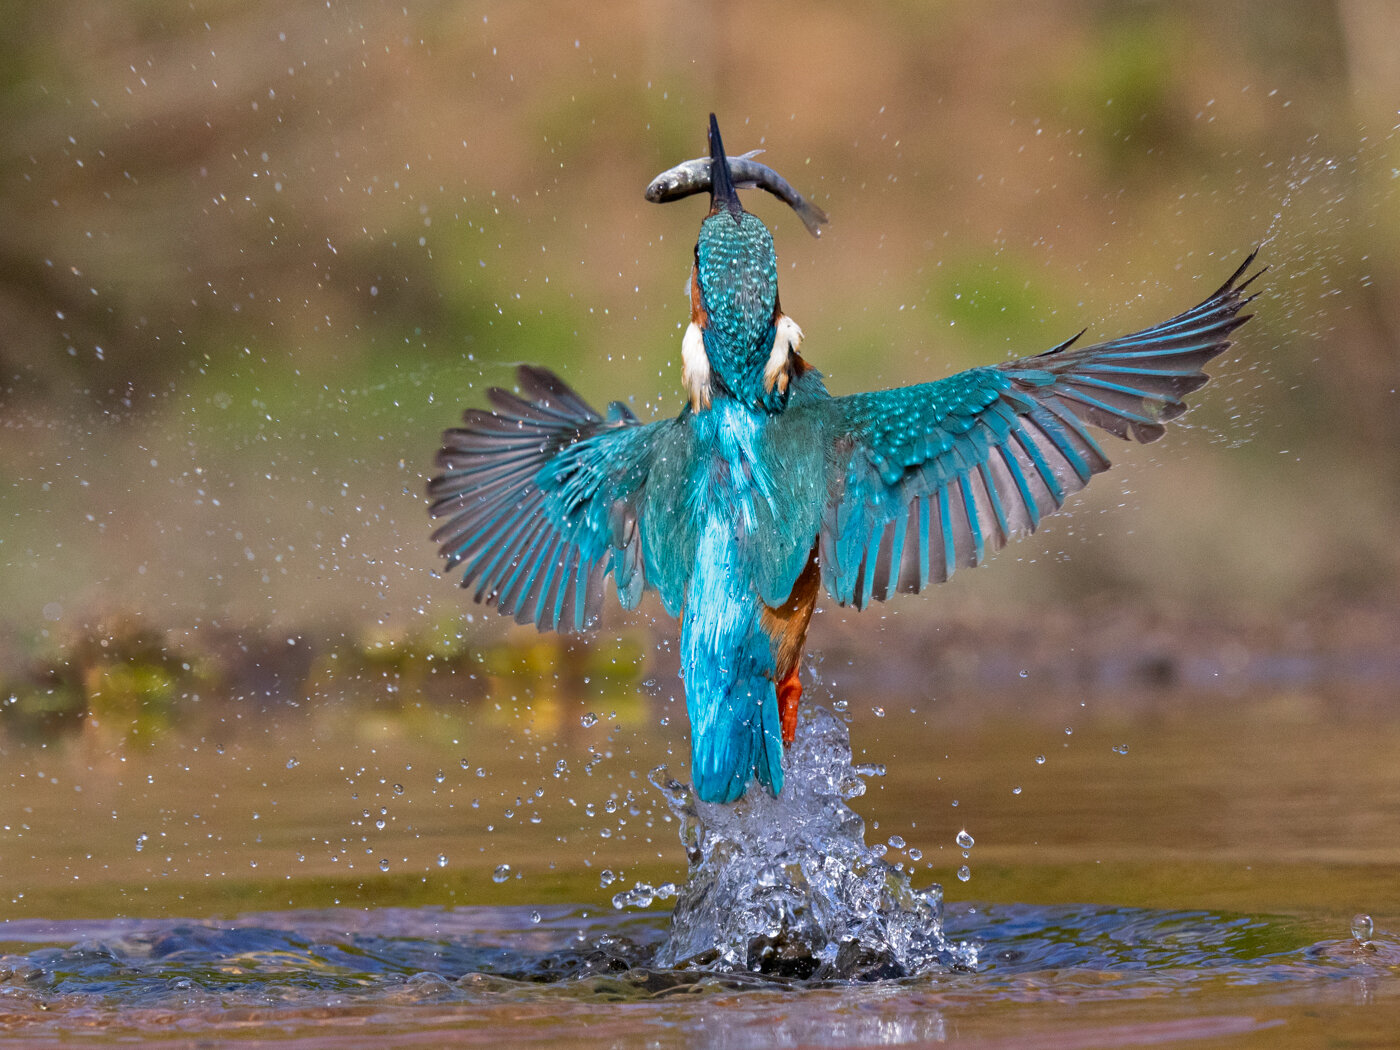 Finding the genes that help kingfishers dive without hurting their